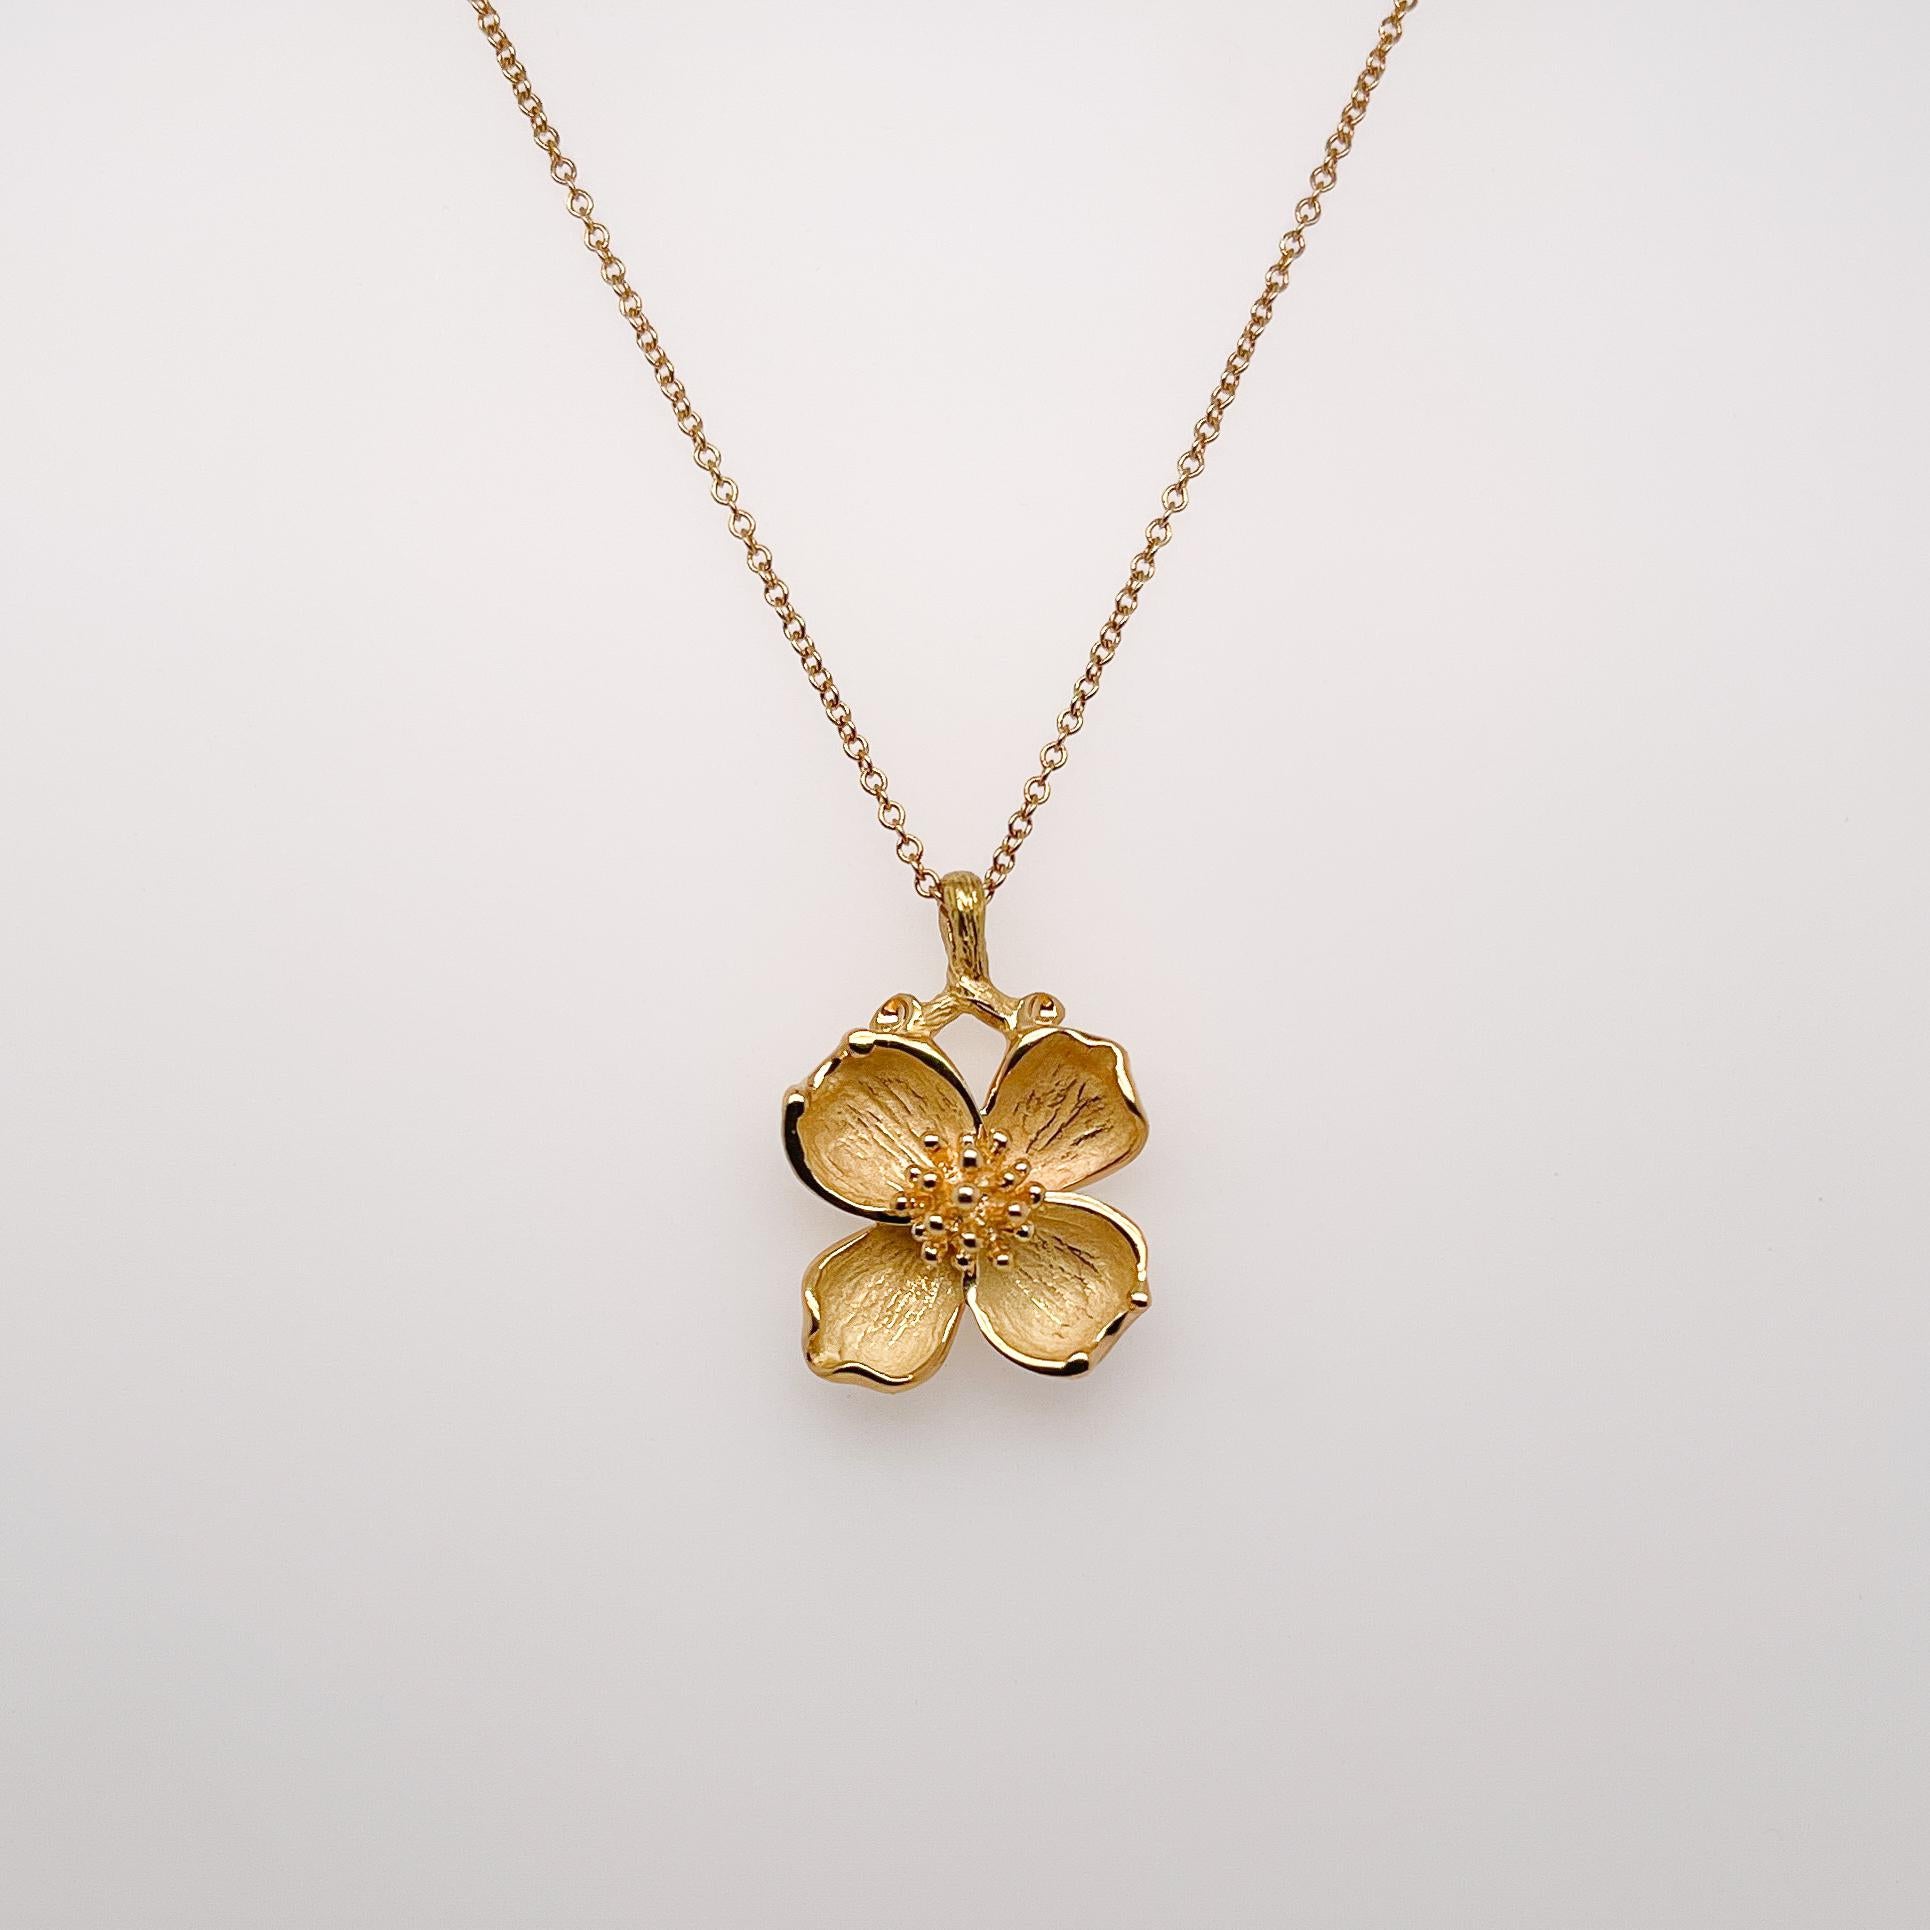 A dogwood flower pendant necklace.

By Tiffany & Co.

In 18k gold. 

Simply a wonderful, hard-to-find pendant by Tiffany & Co.!

Date:
20th Century

Overall Condition:
It is in overall good, as-pictured, used estate condition with some very fine &